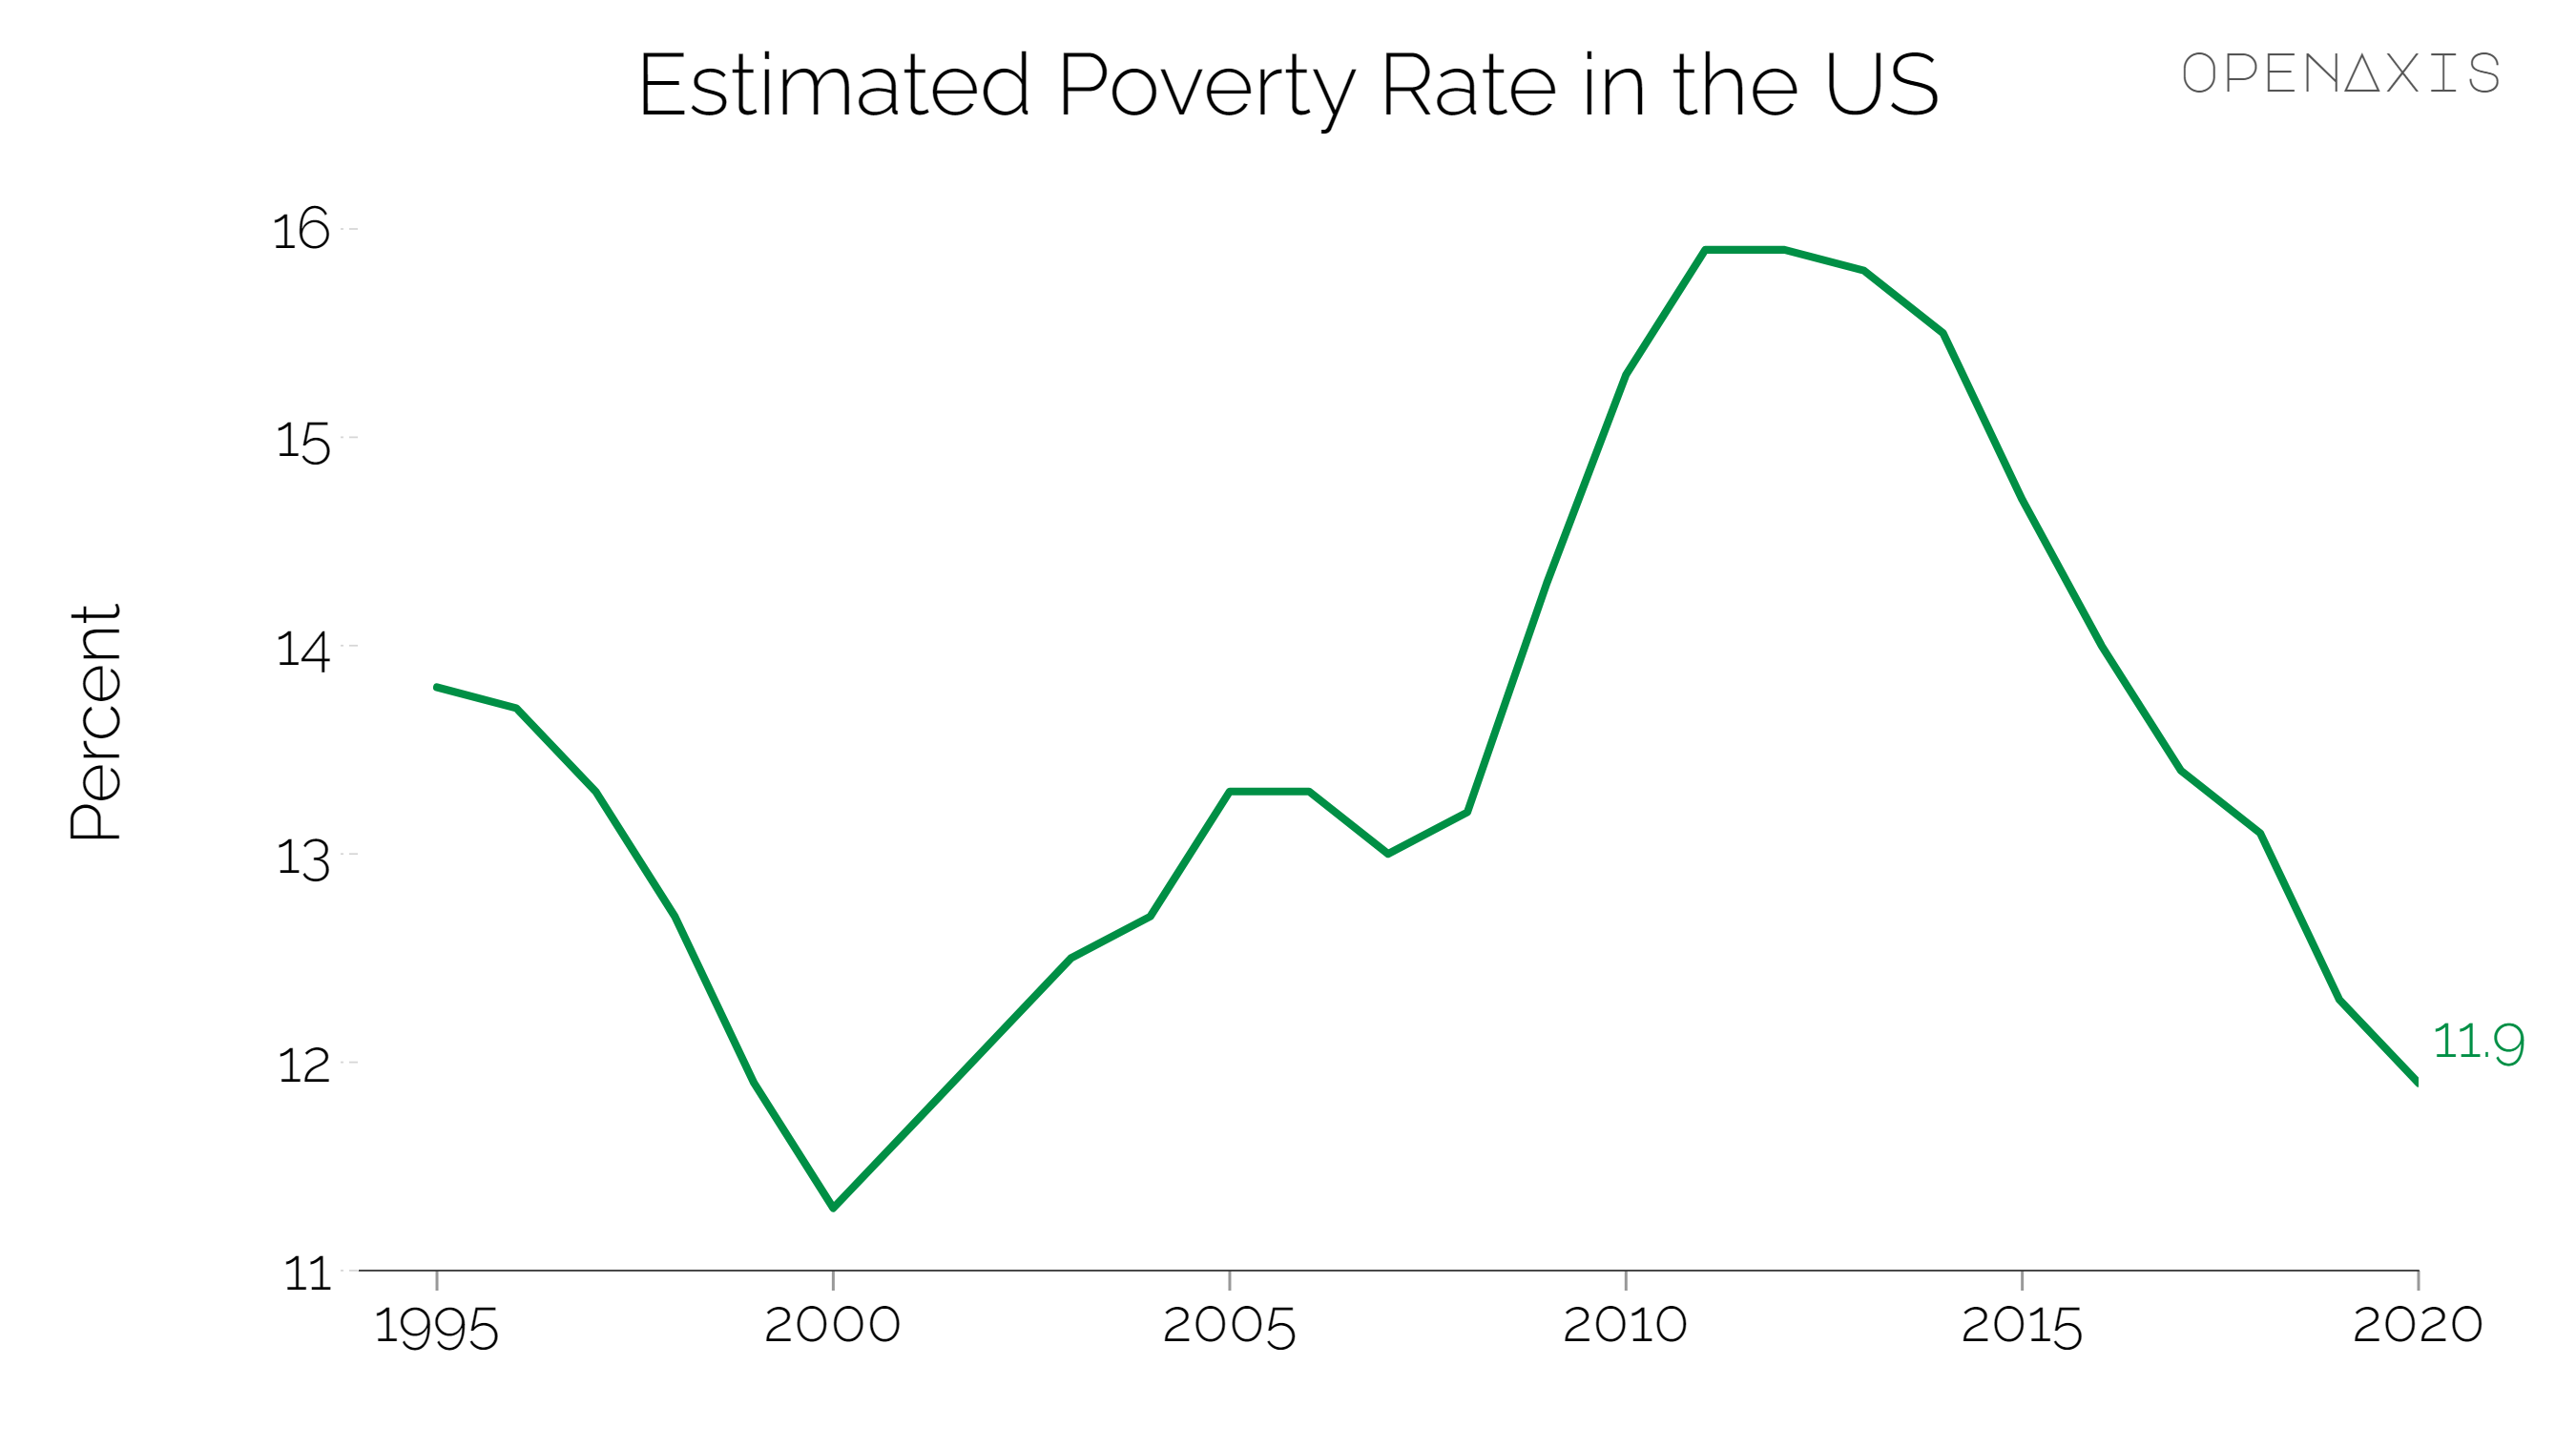 "Estimated Poverty Rate in the US"